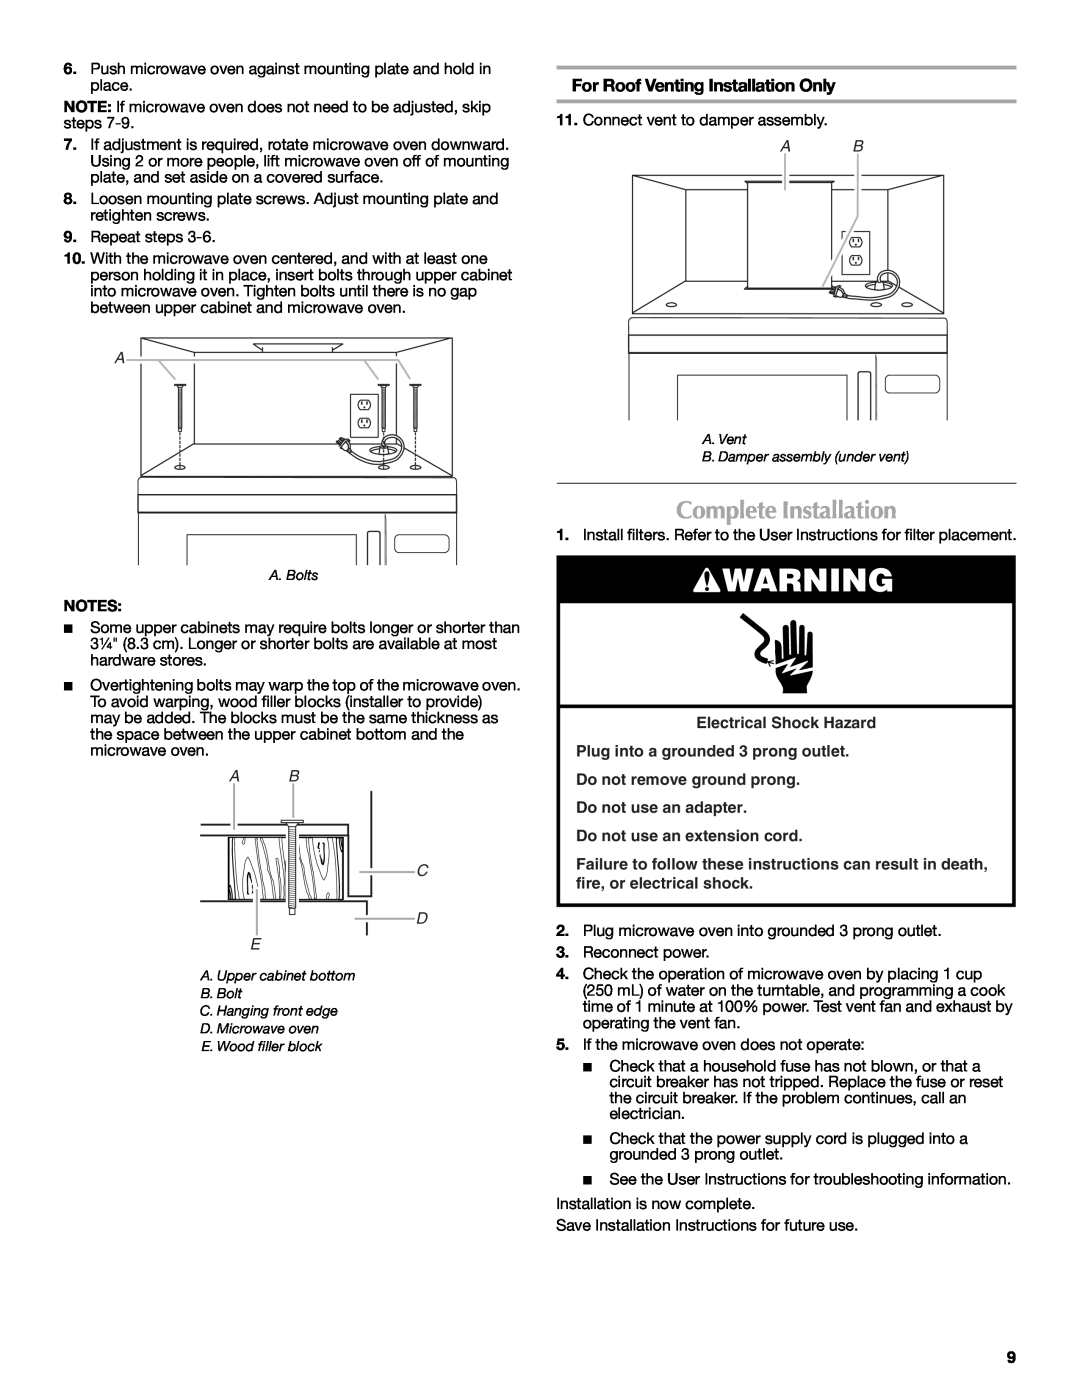 Maytag W10188947A Complete Installation, For Roof Venting Installation Only, A B C D E, Do not use an extension cord 